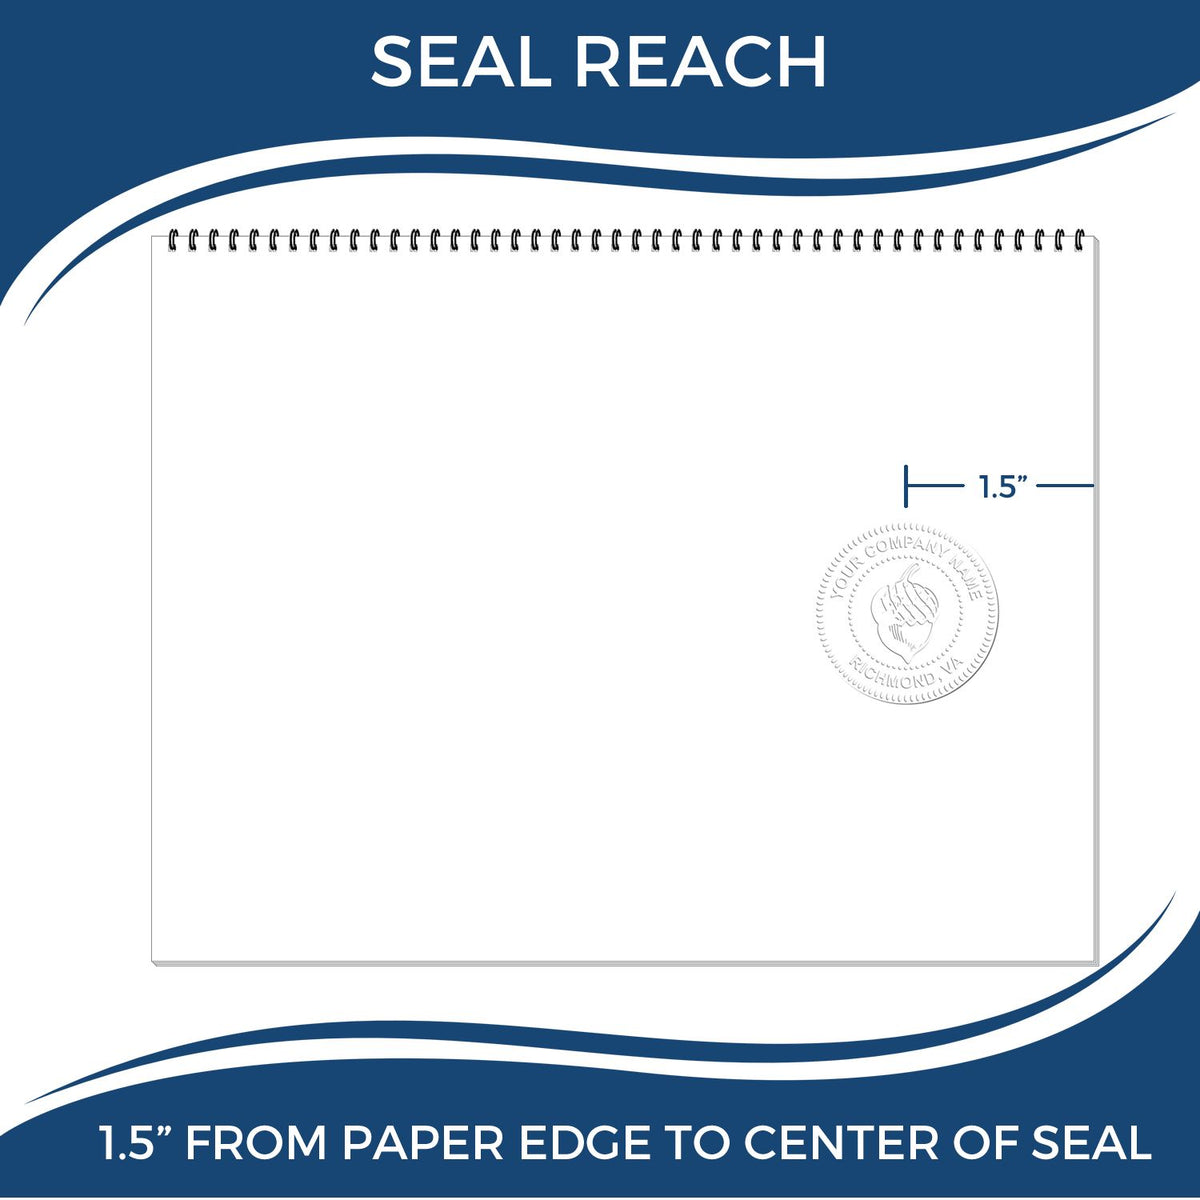 An infographic showing the seal reach which is represented by a ruler and a miniature seal image of the Hybrid New York Land Surveyor Seal